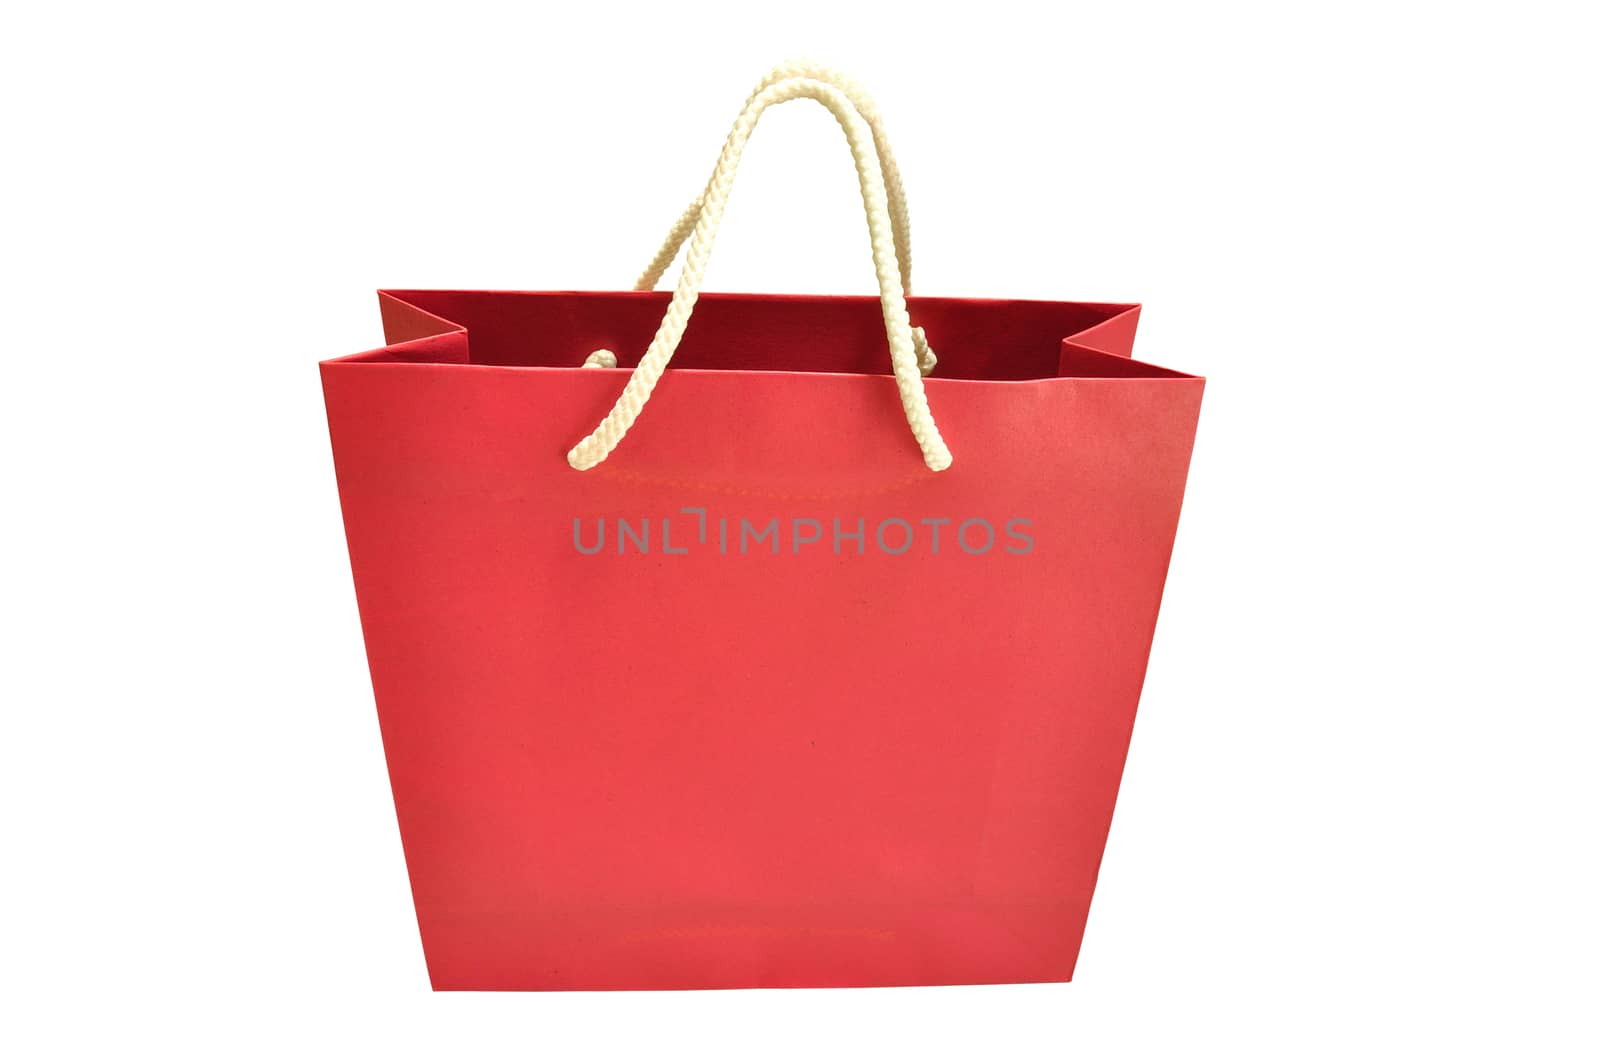 Paper shopping bag on white background by thampapon